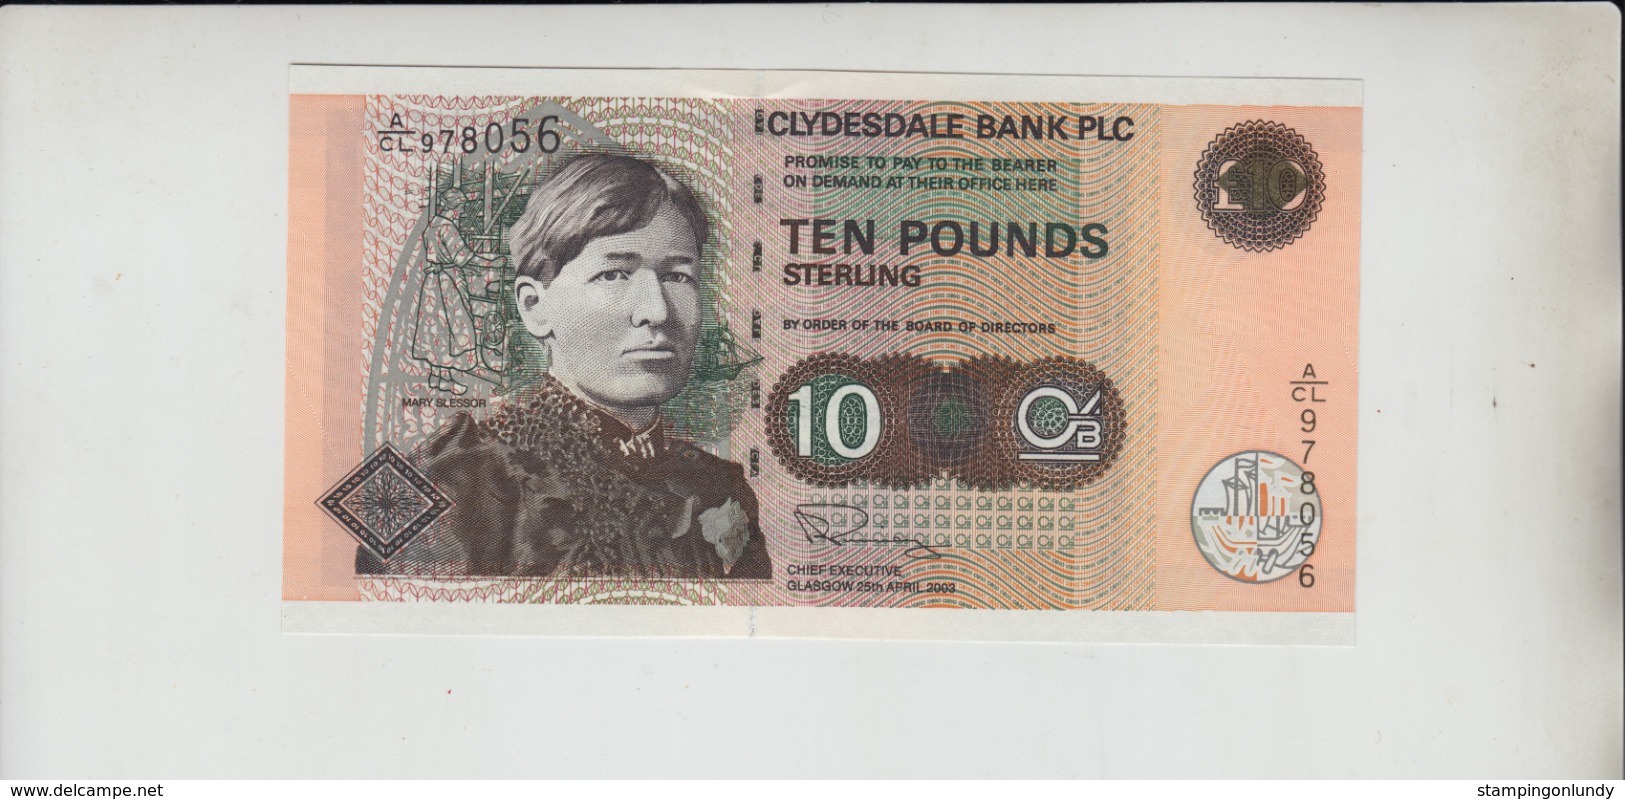 AB622 Clydesdale Bank PLC £10 Note 25th April 2003 # A/CL 978056 FREE UK P+P BUY 1 GET 1 (CHEAPEST) 1/2 PRICE BANKNOTES - 10 Pounds